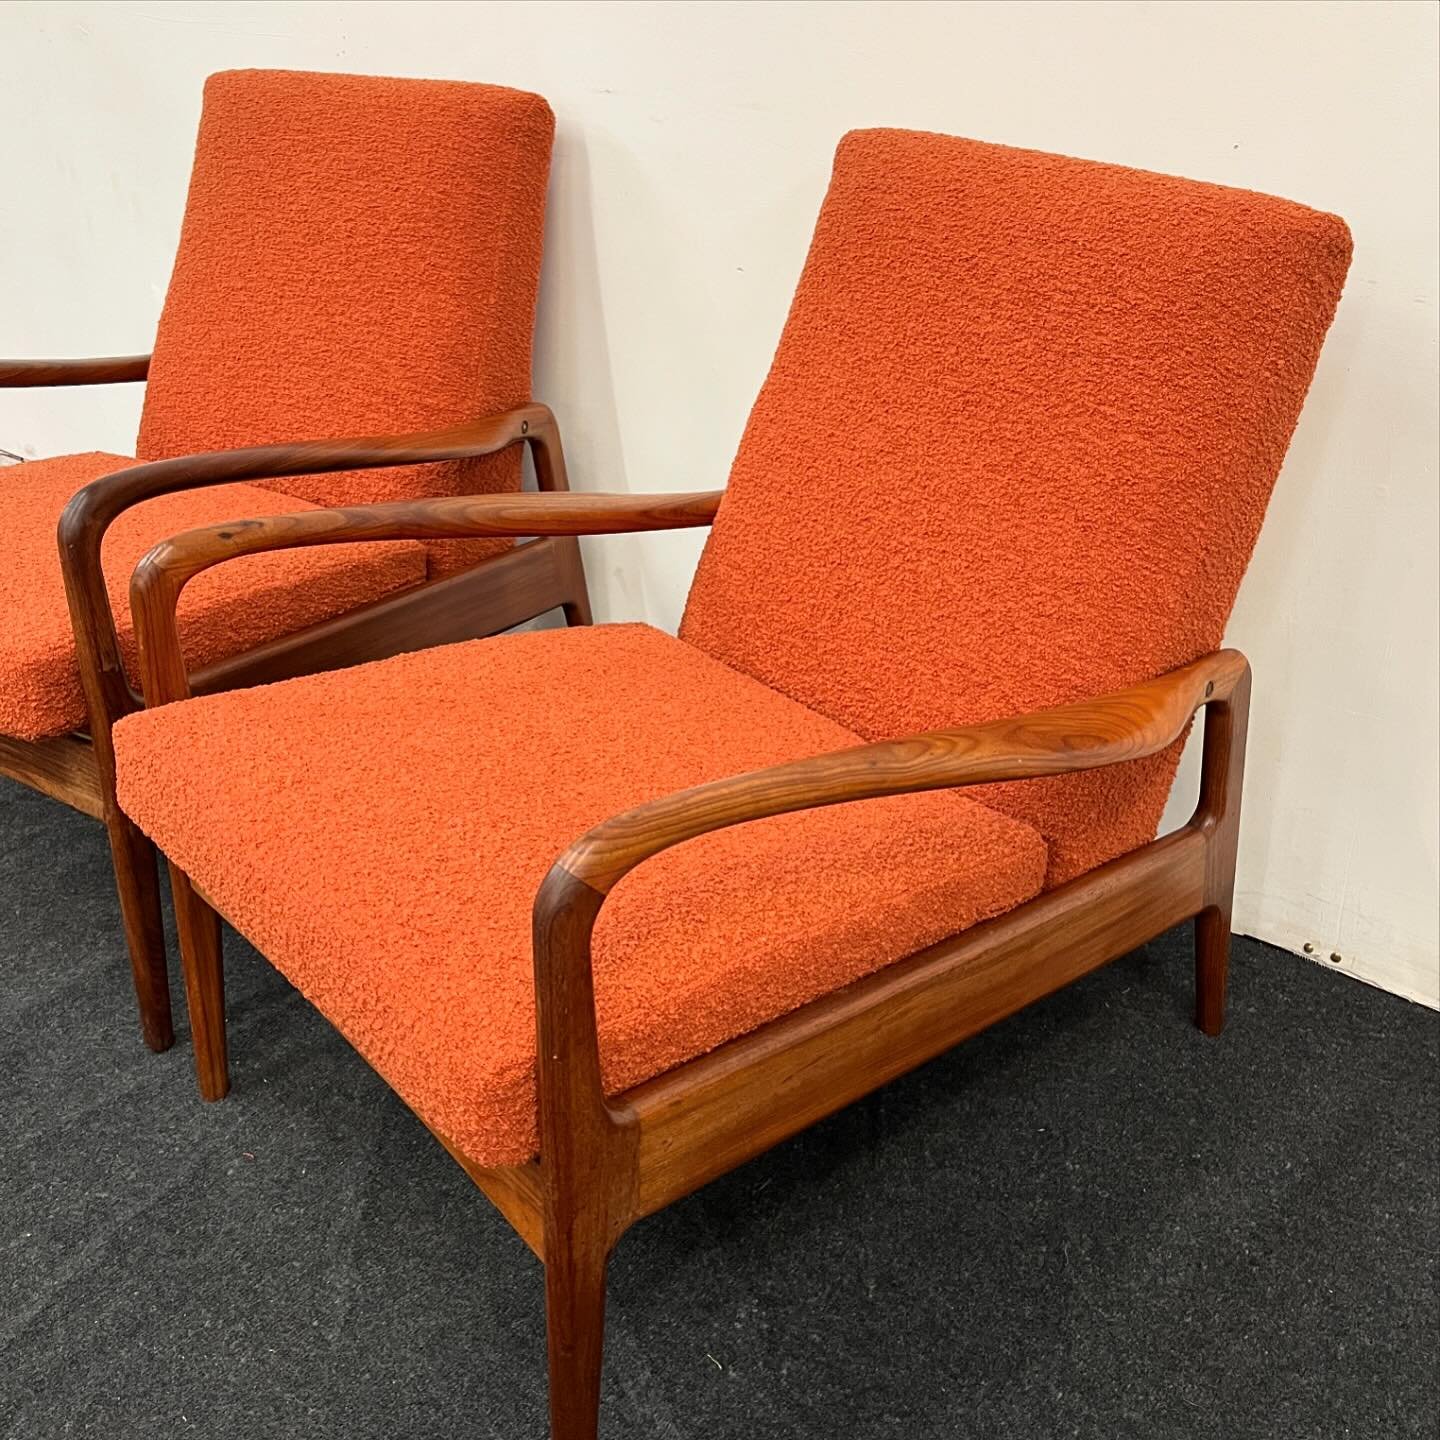 Look at these sexy Scandi delights&hellip; 🧡

We&rsquo;ve had the pleasure to rejuvenate these two chairs that were tired, broken and desperate for some TLC.

Frames strengthened, wired wooled and oiled to bring back their gorgeous grain. New Pirell